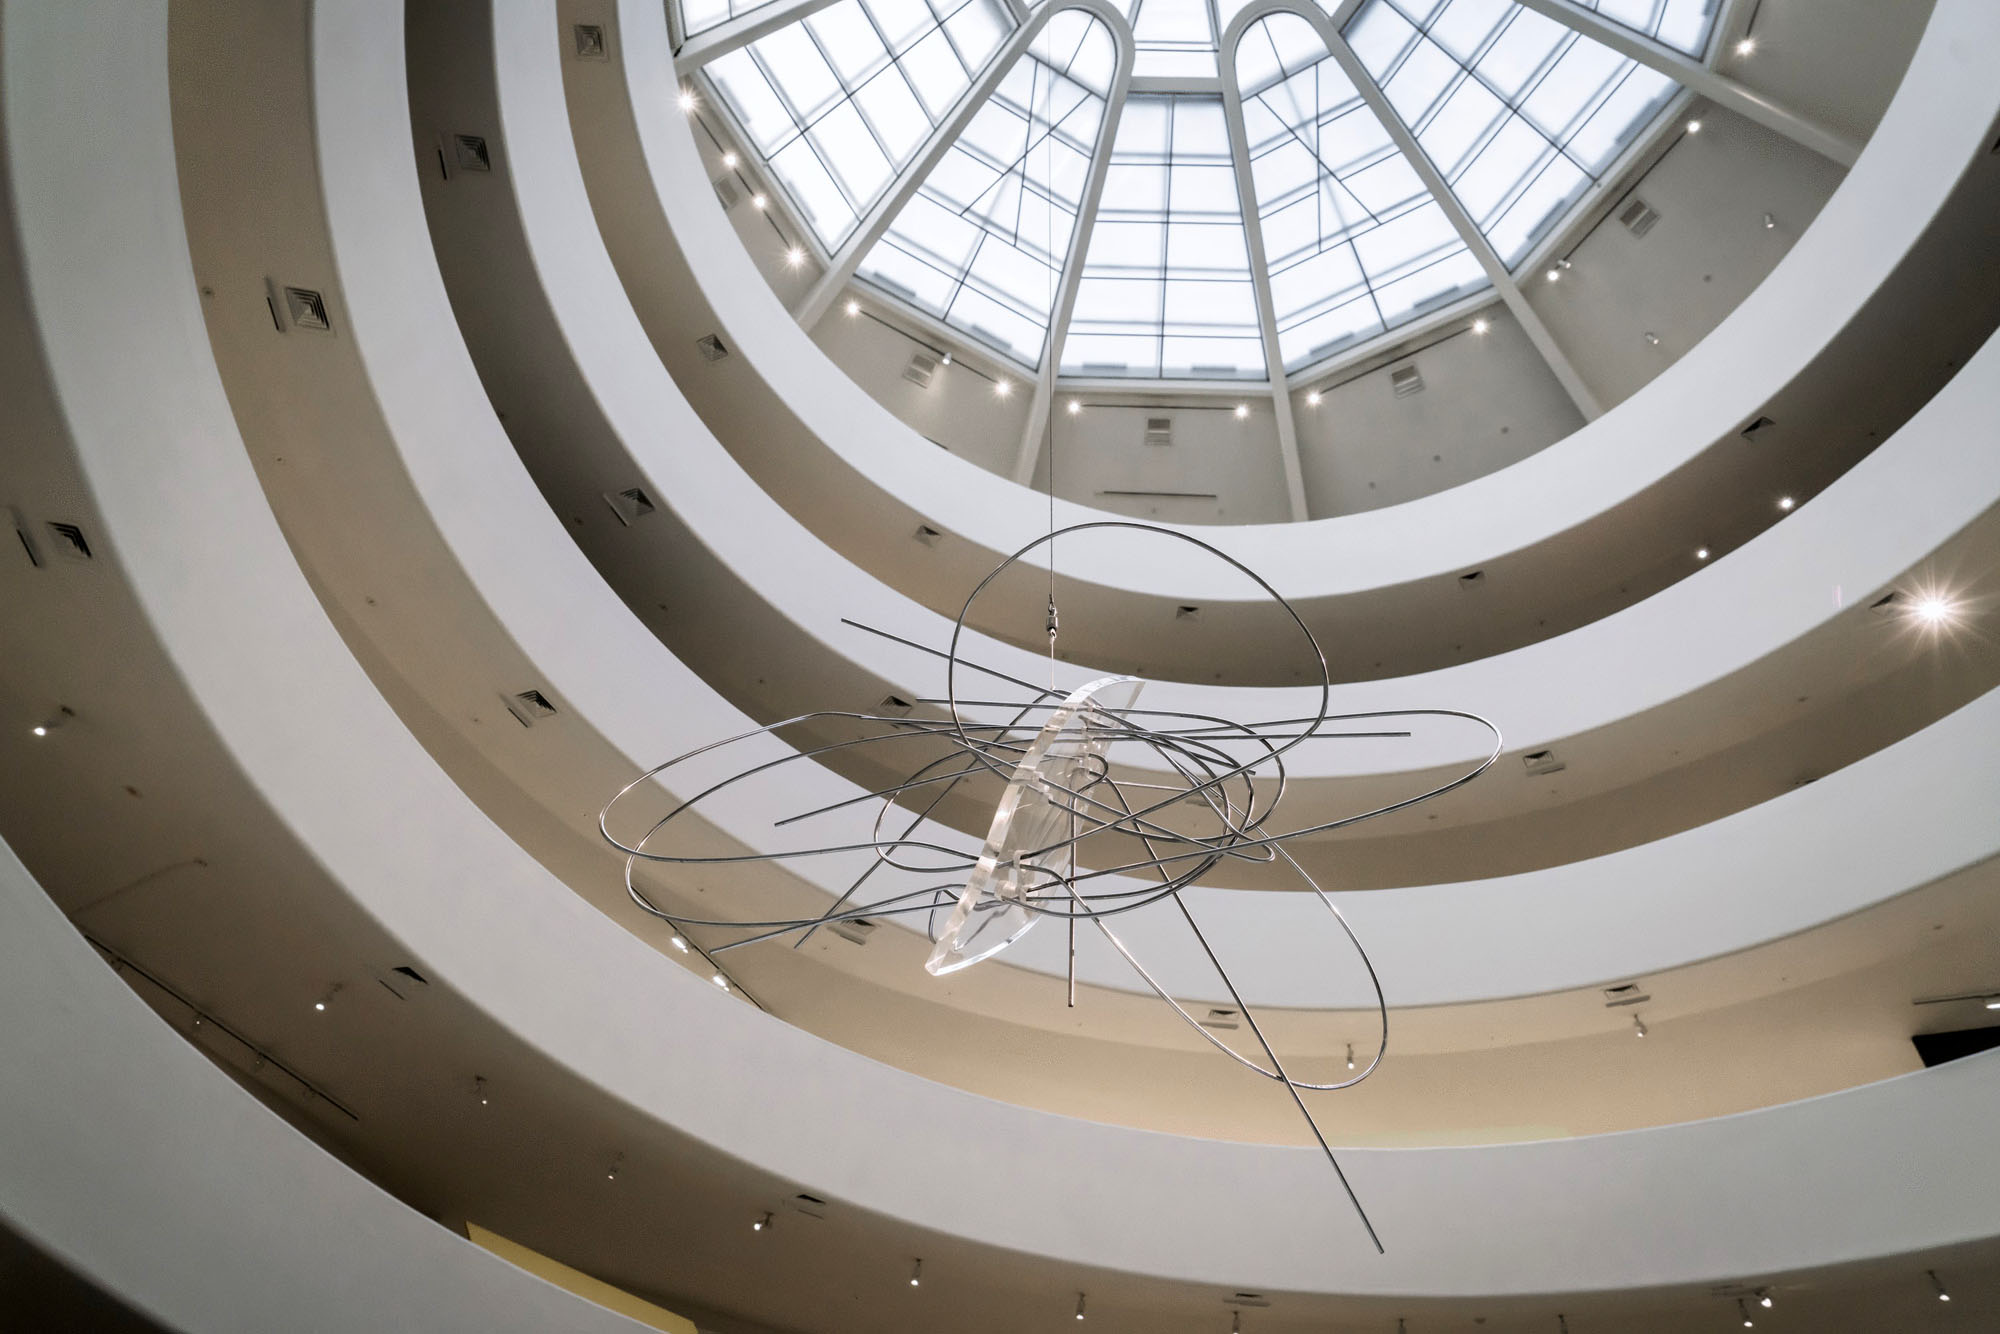 László Moholy-Nagy (Hungarian, 1895-1946) 'Dual Form with Chromium Rods' 1946 (installation view)